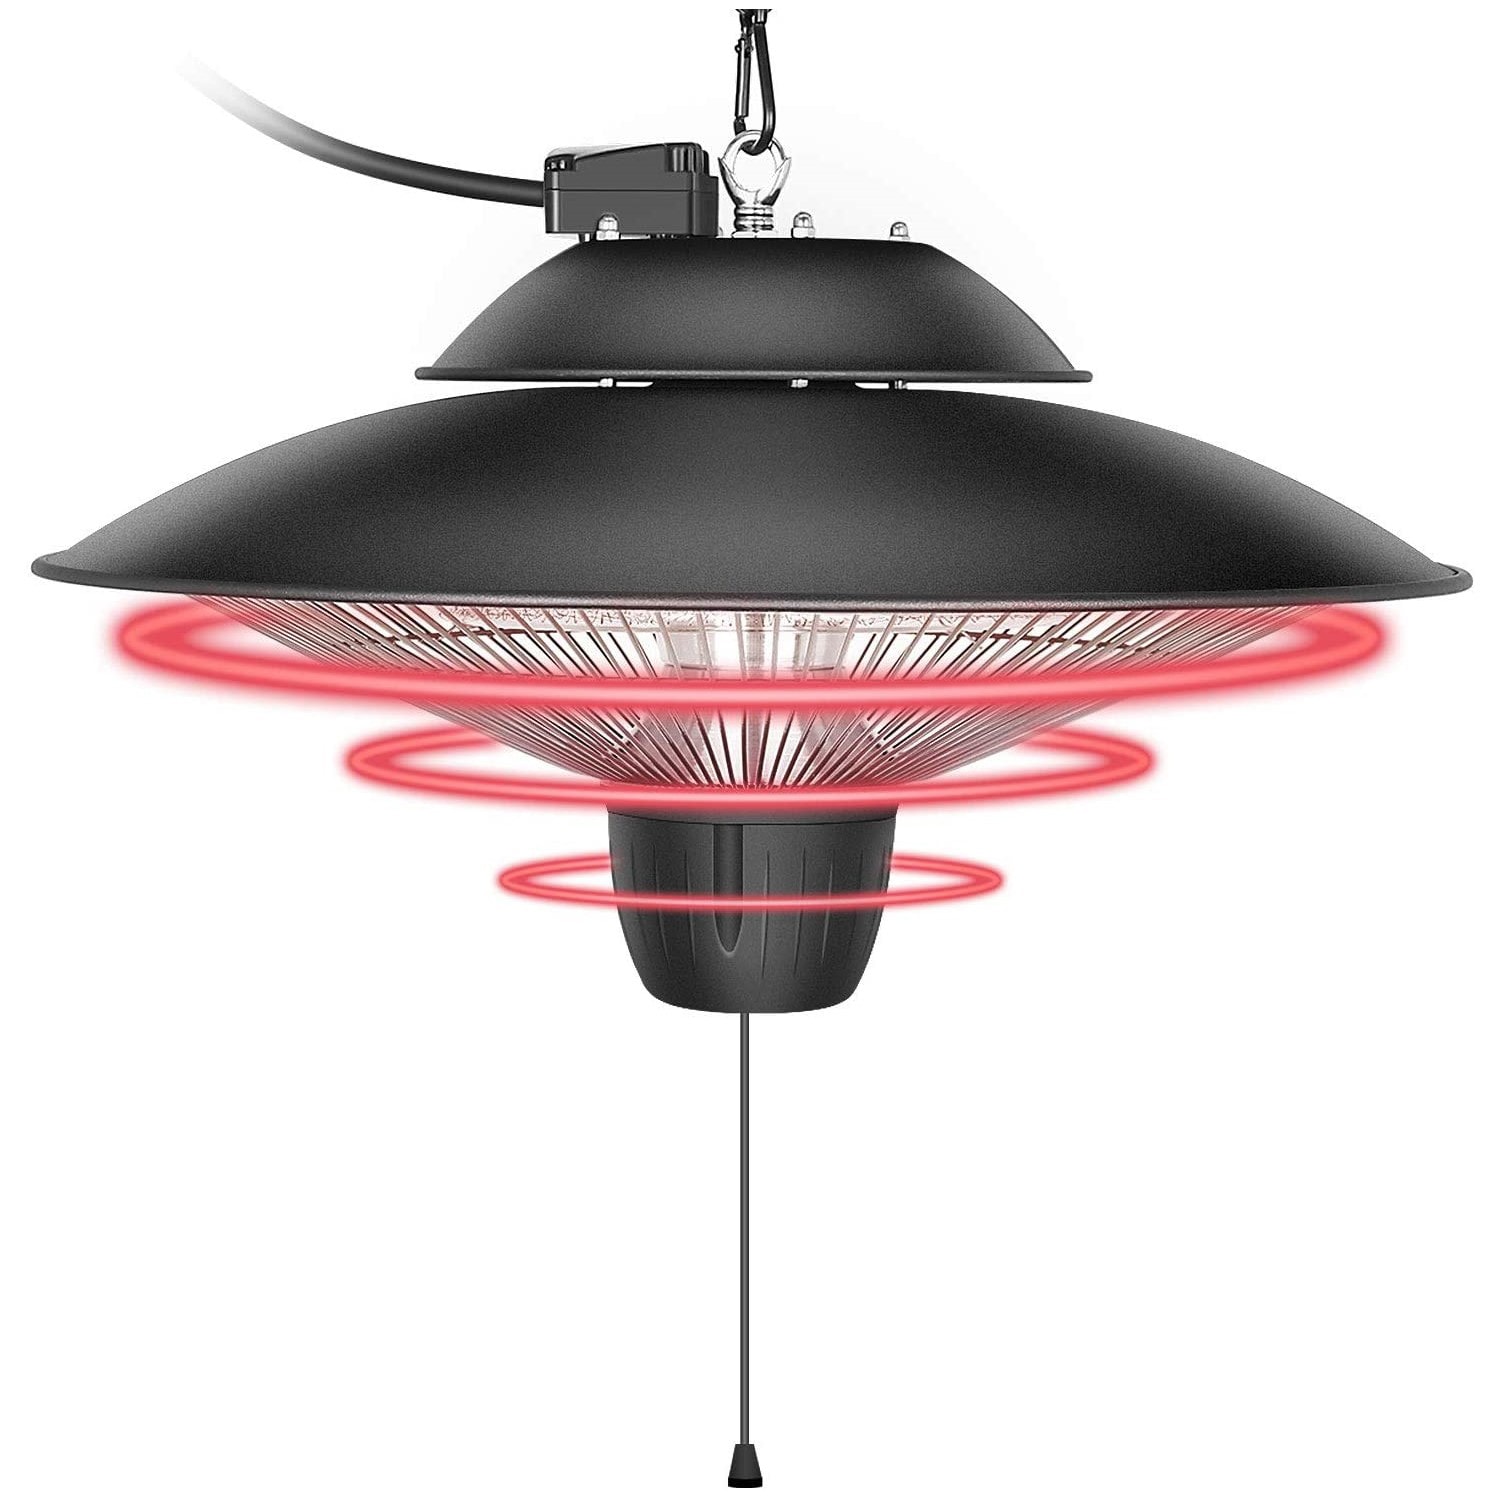 Patio Heaters & Accessories at Lowes.com